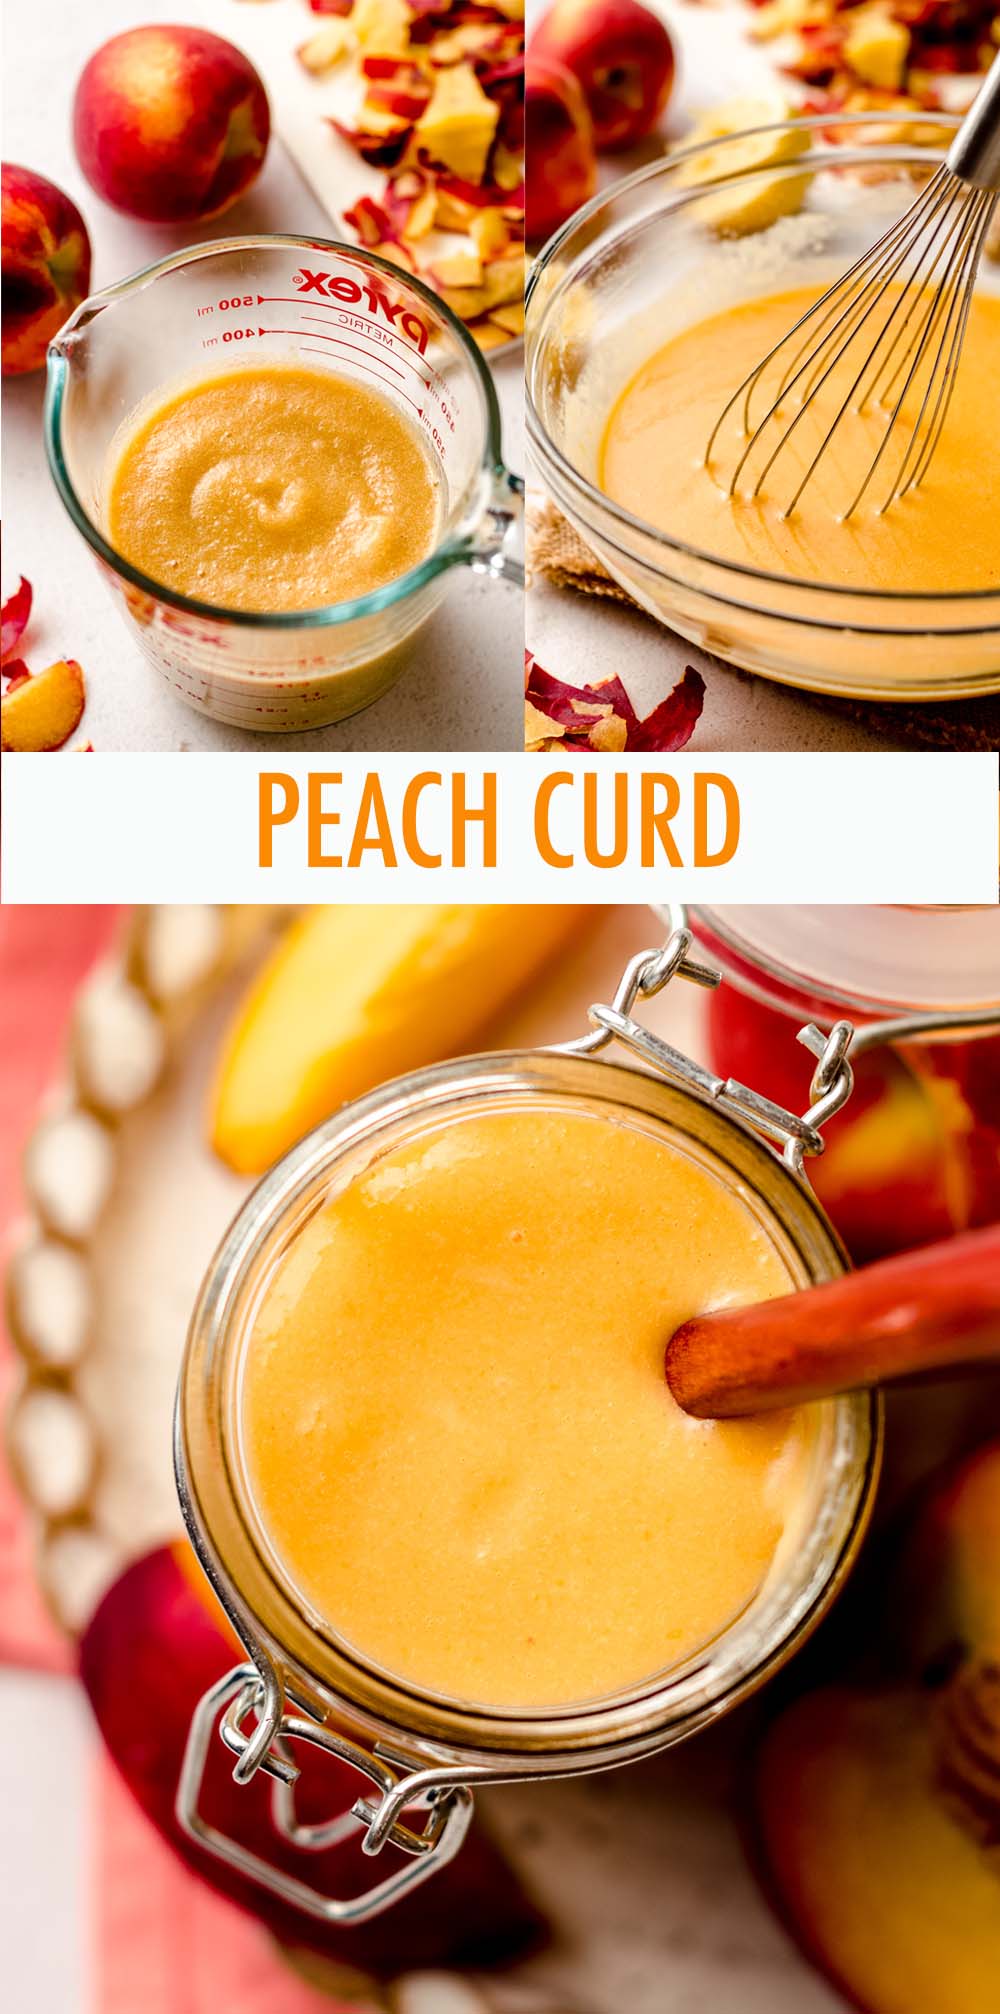 Sweet and creamy peach curd made from fresh peaches and a few simple ingredients. Perfect for filling cakes, pies, and cupcakes, or using as a spread or topping. via @frshaprilflours